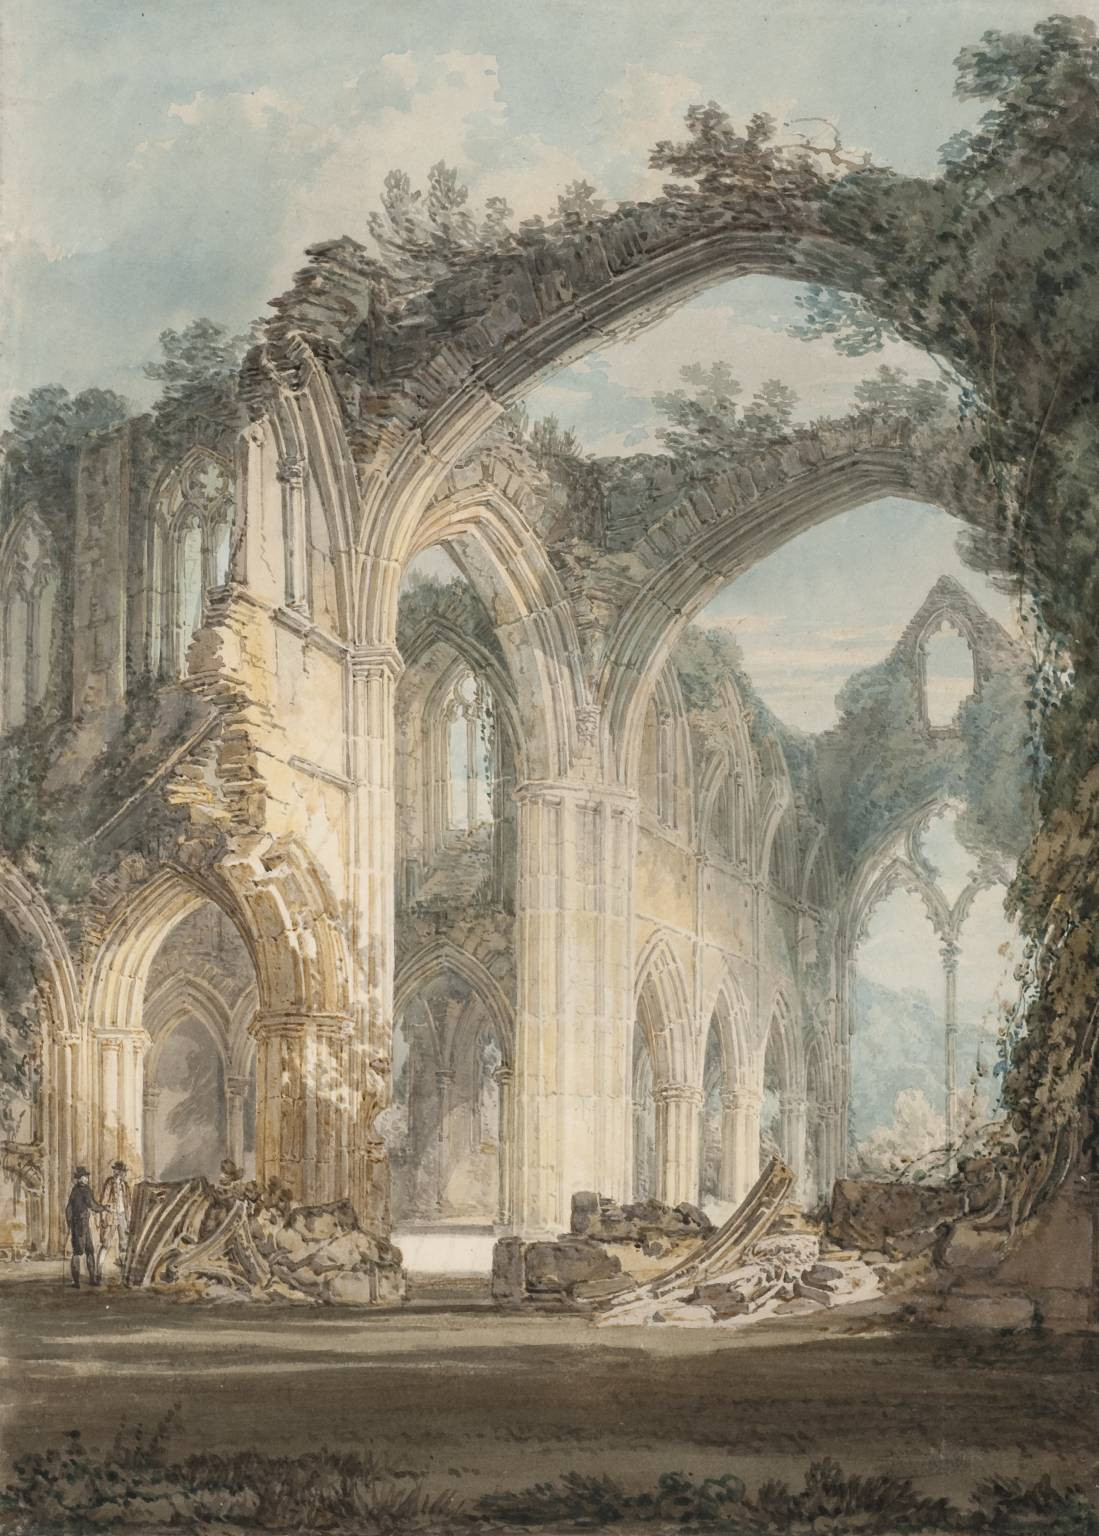 Joseph Mallord William TurnerTintern Abbey: The Crossing and Chancel, Looking towards the East Window, 1794.